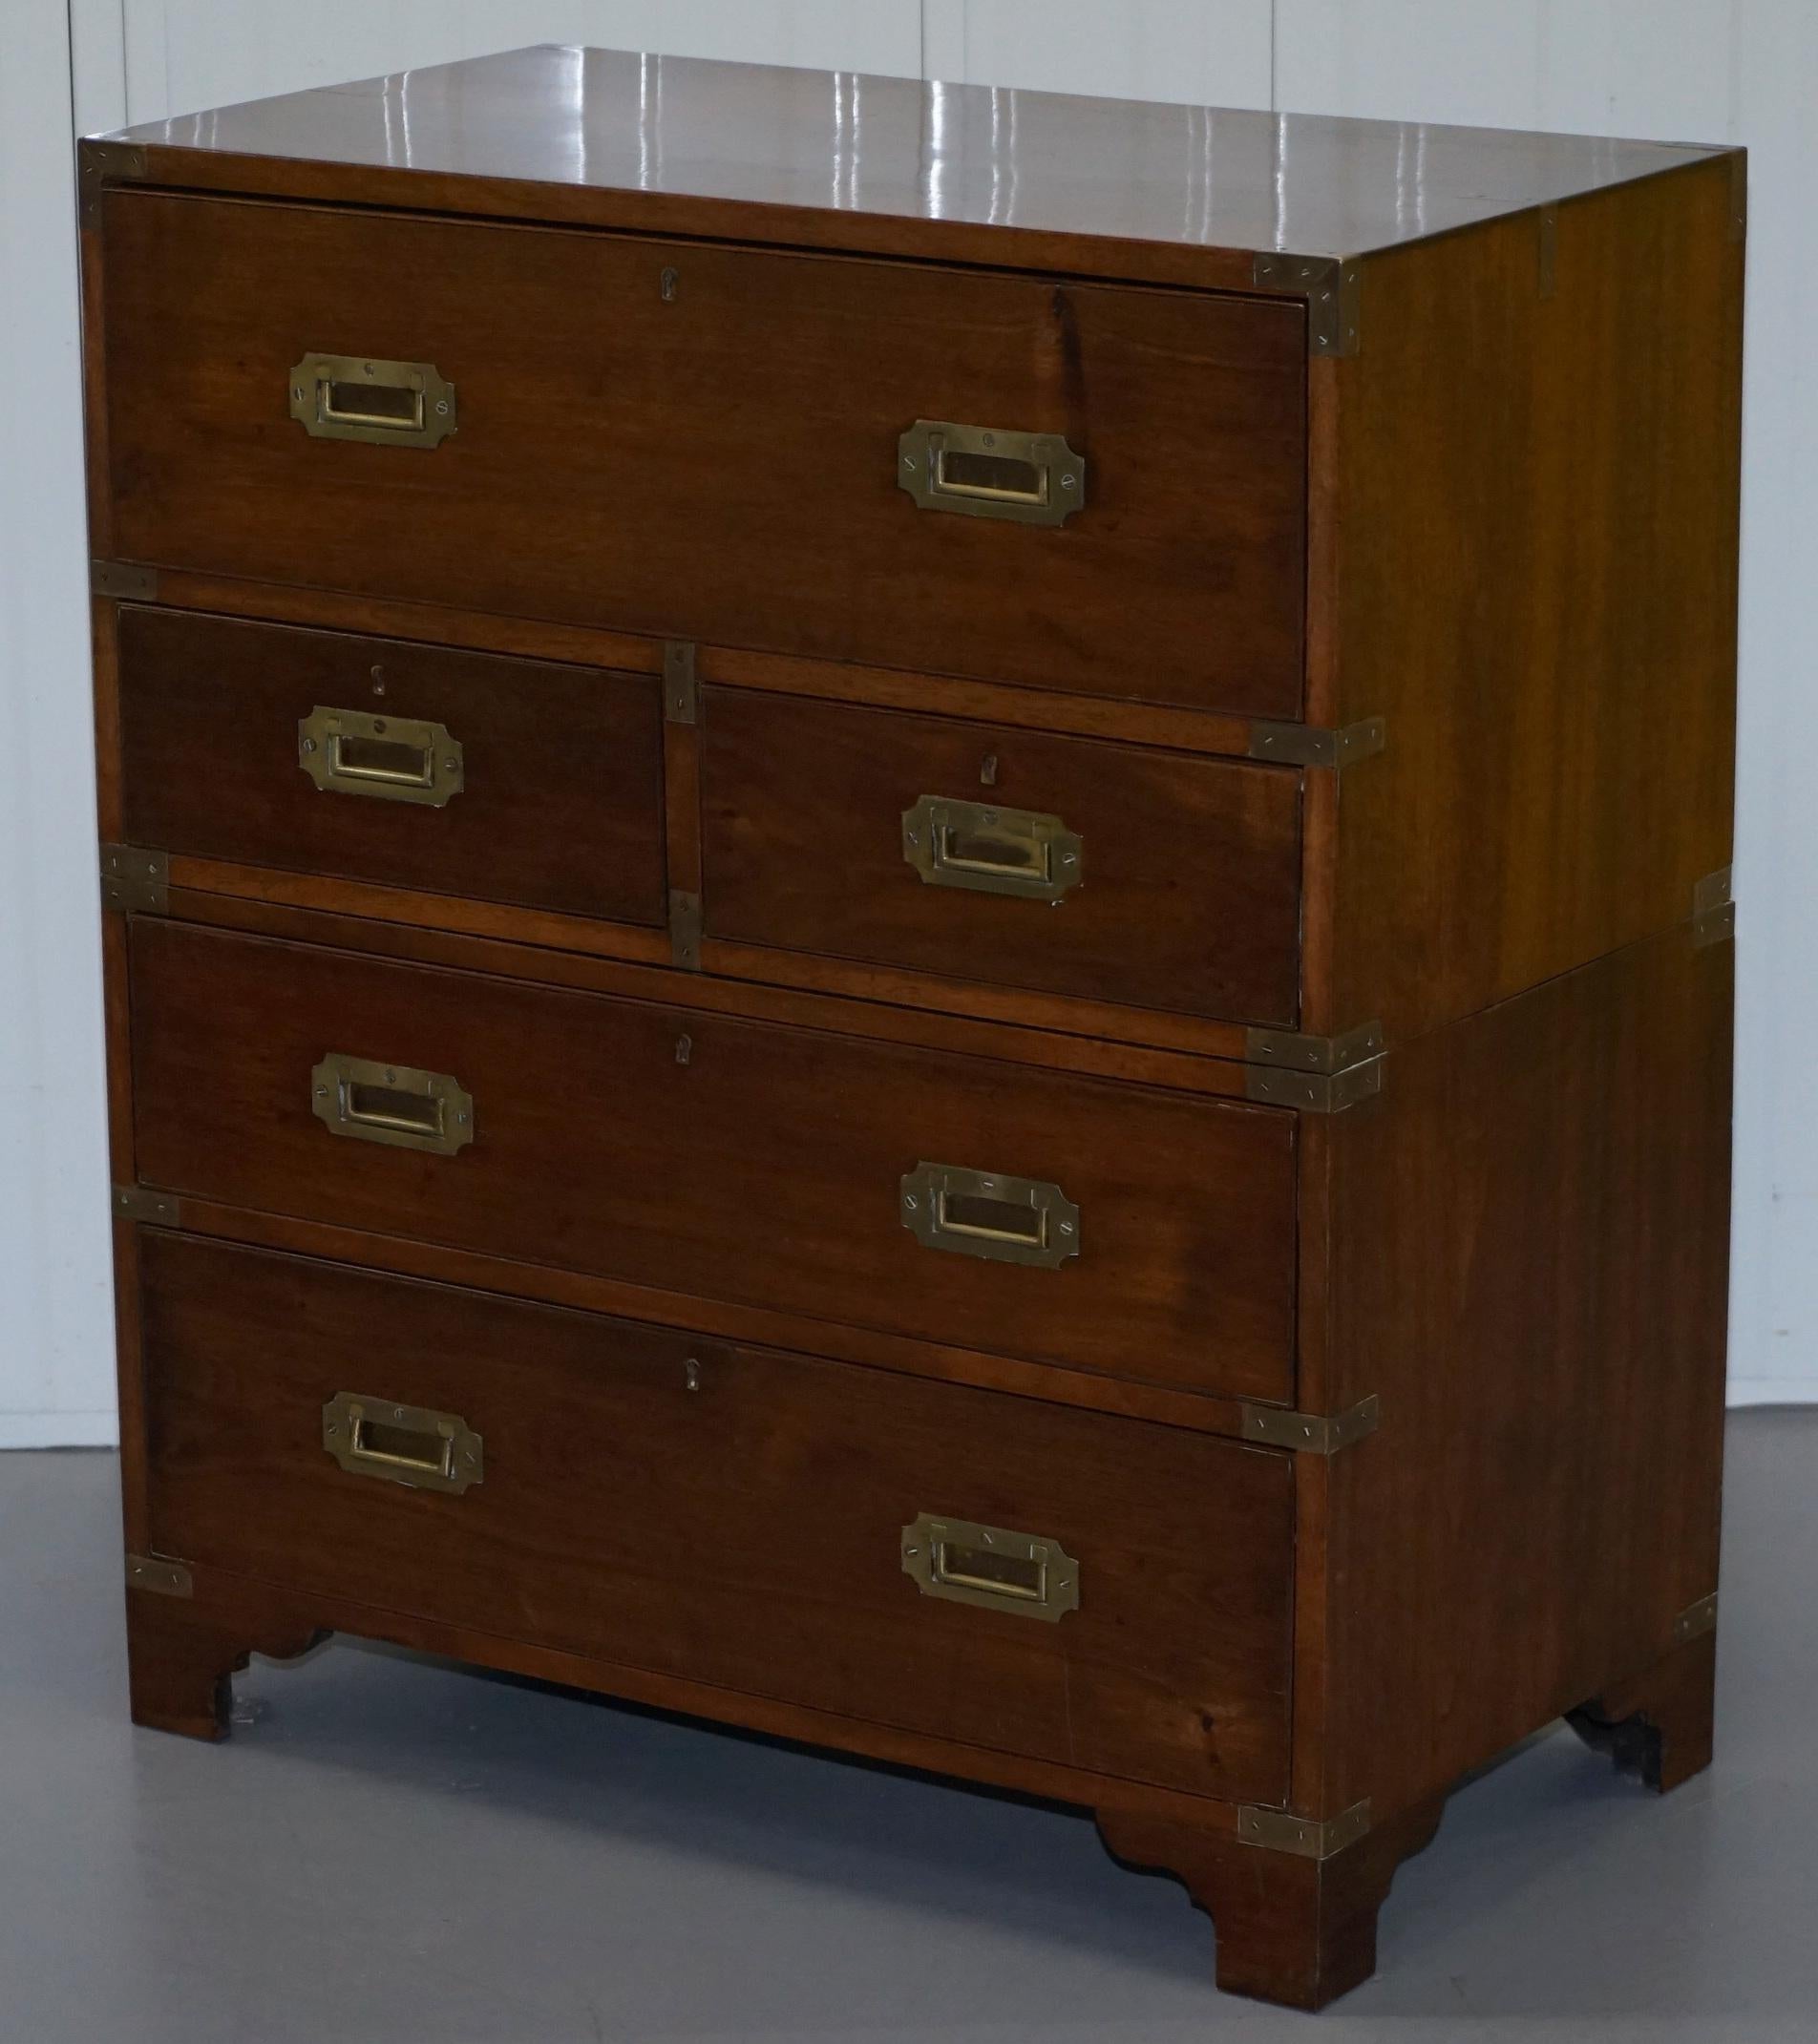 Hand-Crafted Victorian Military Campaign Chest of Drawers Built in Secrataire Drop Front Desk